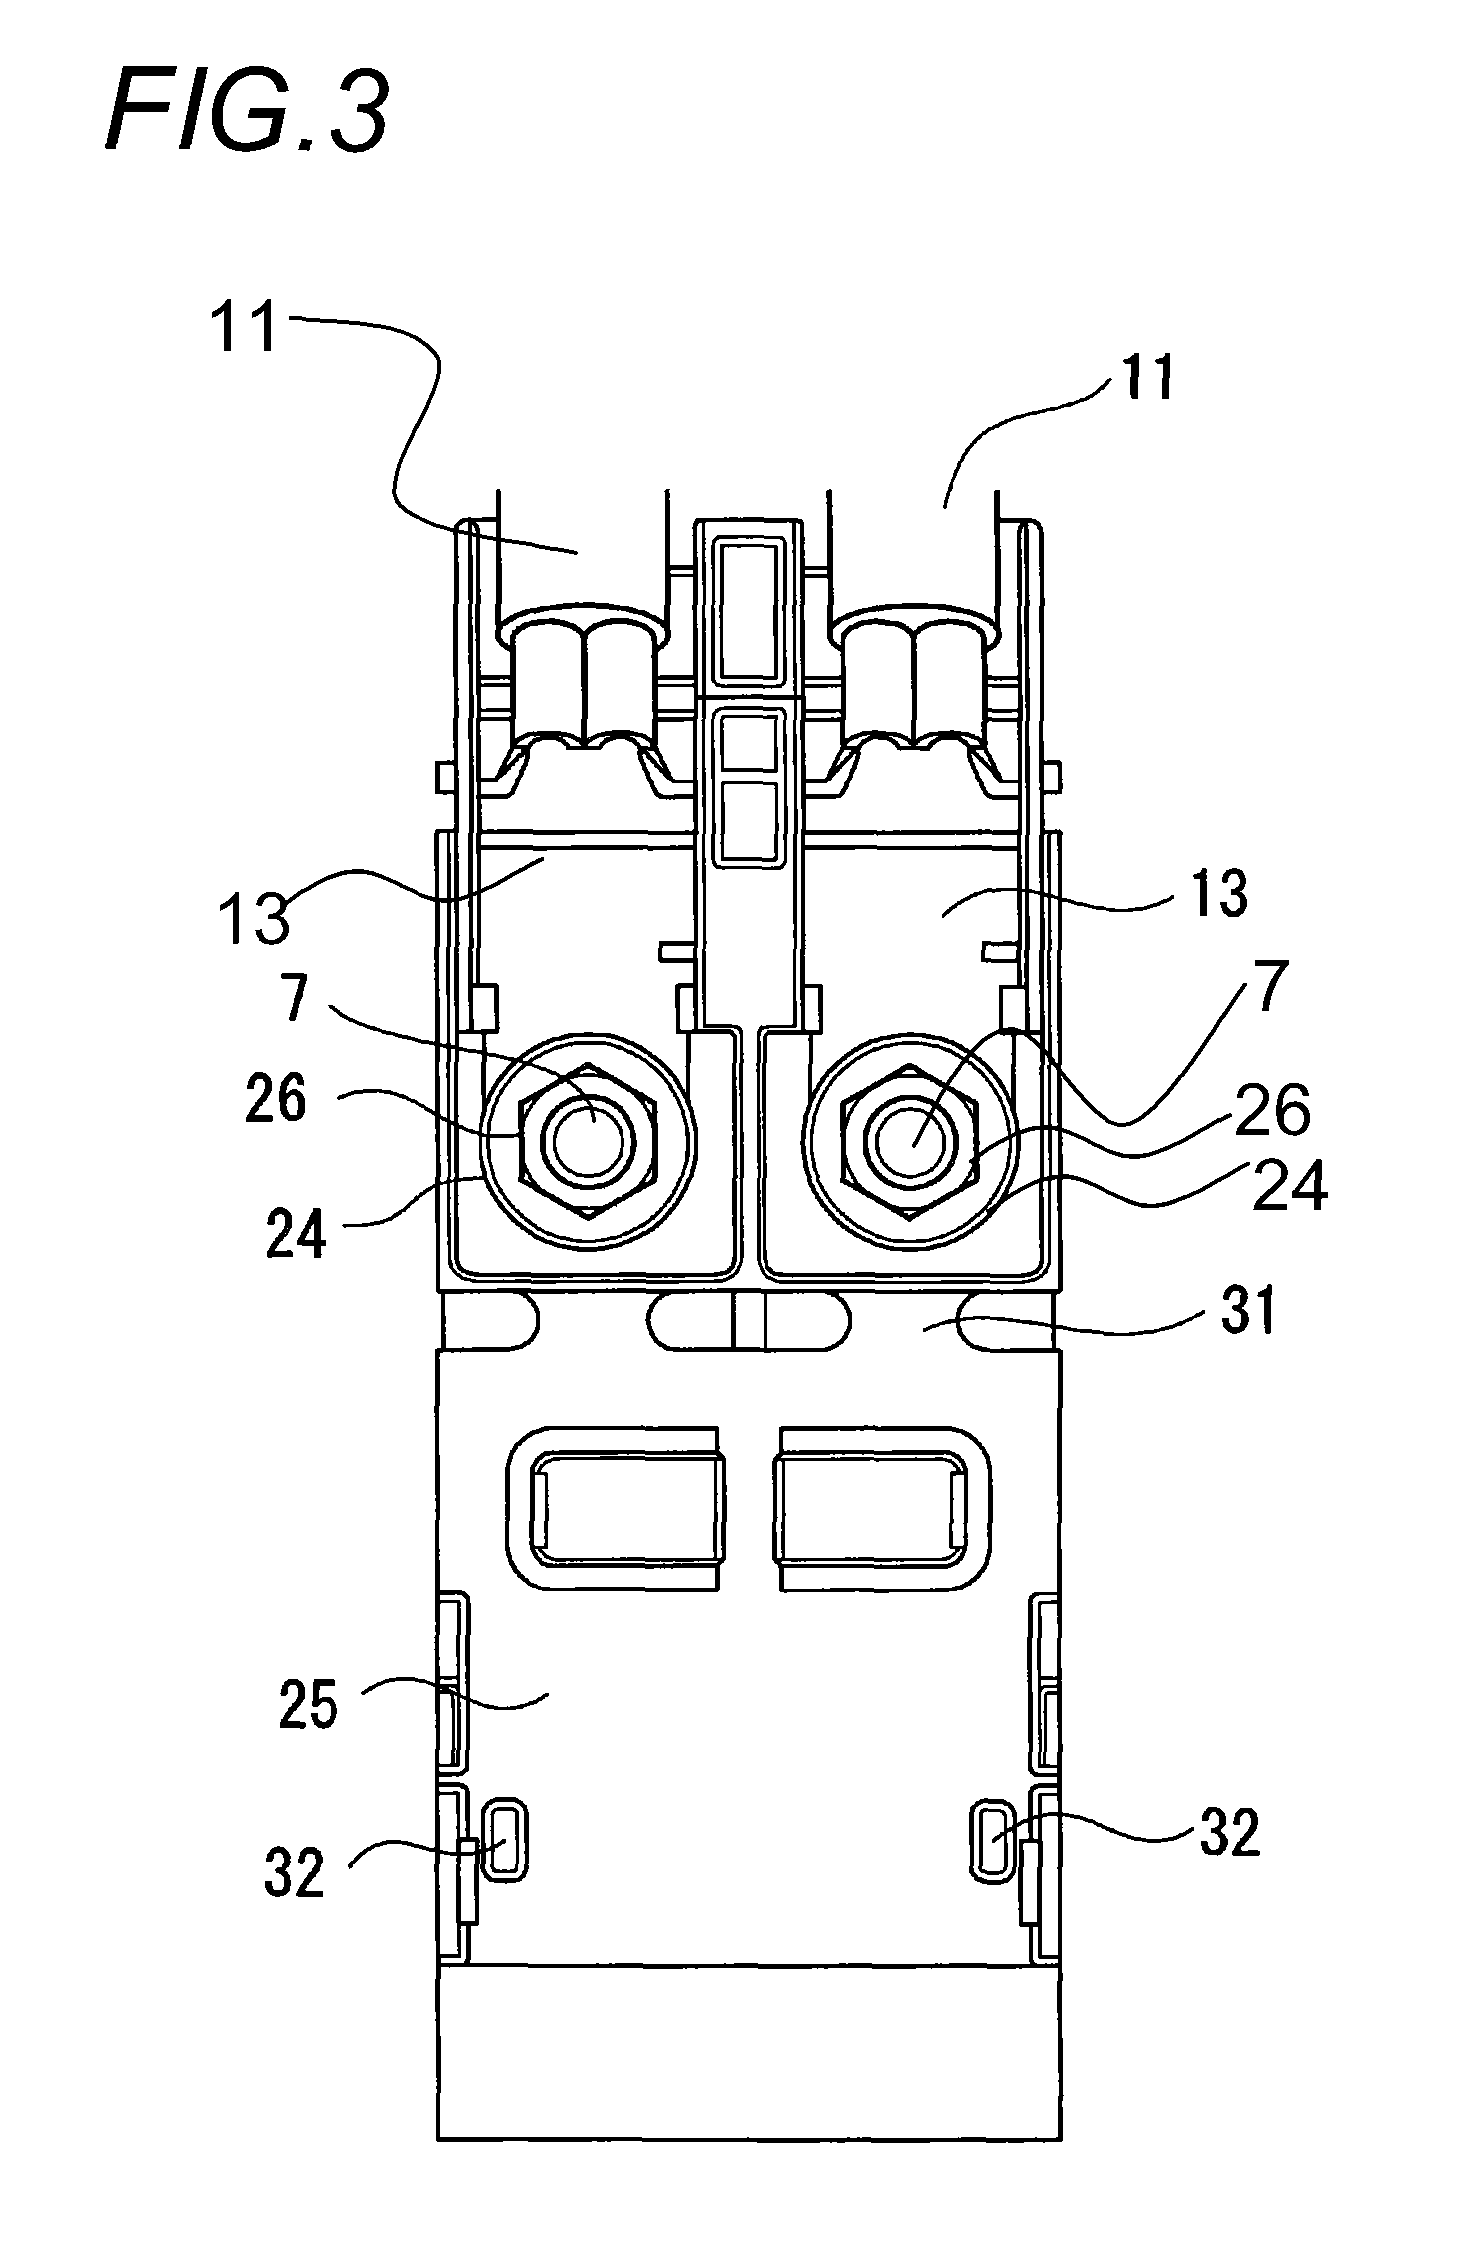 Structure for attaching service plug